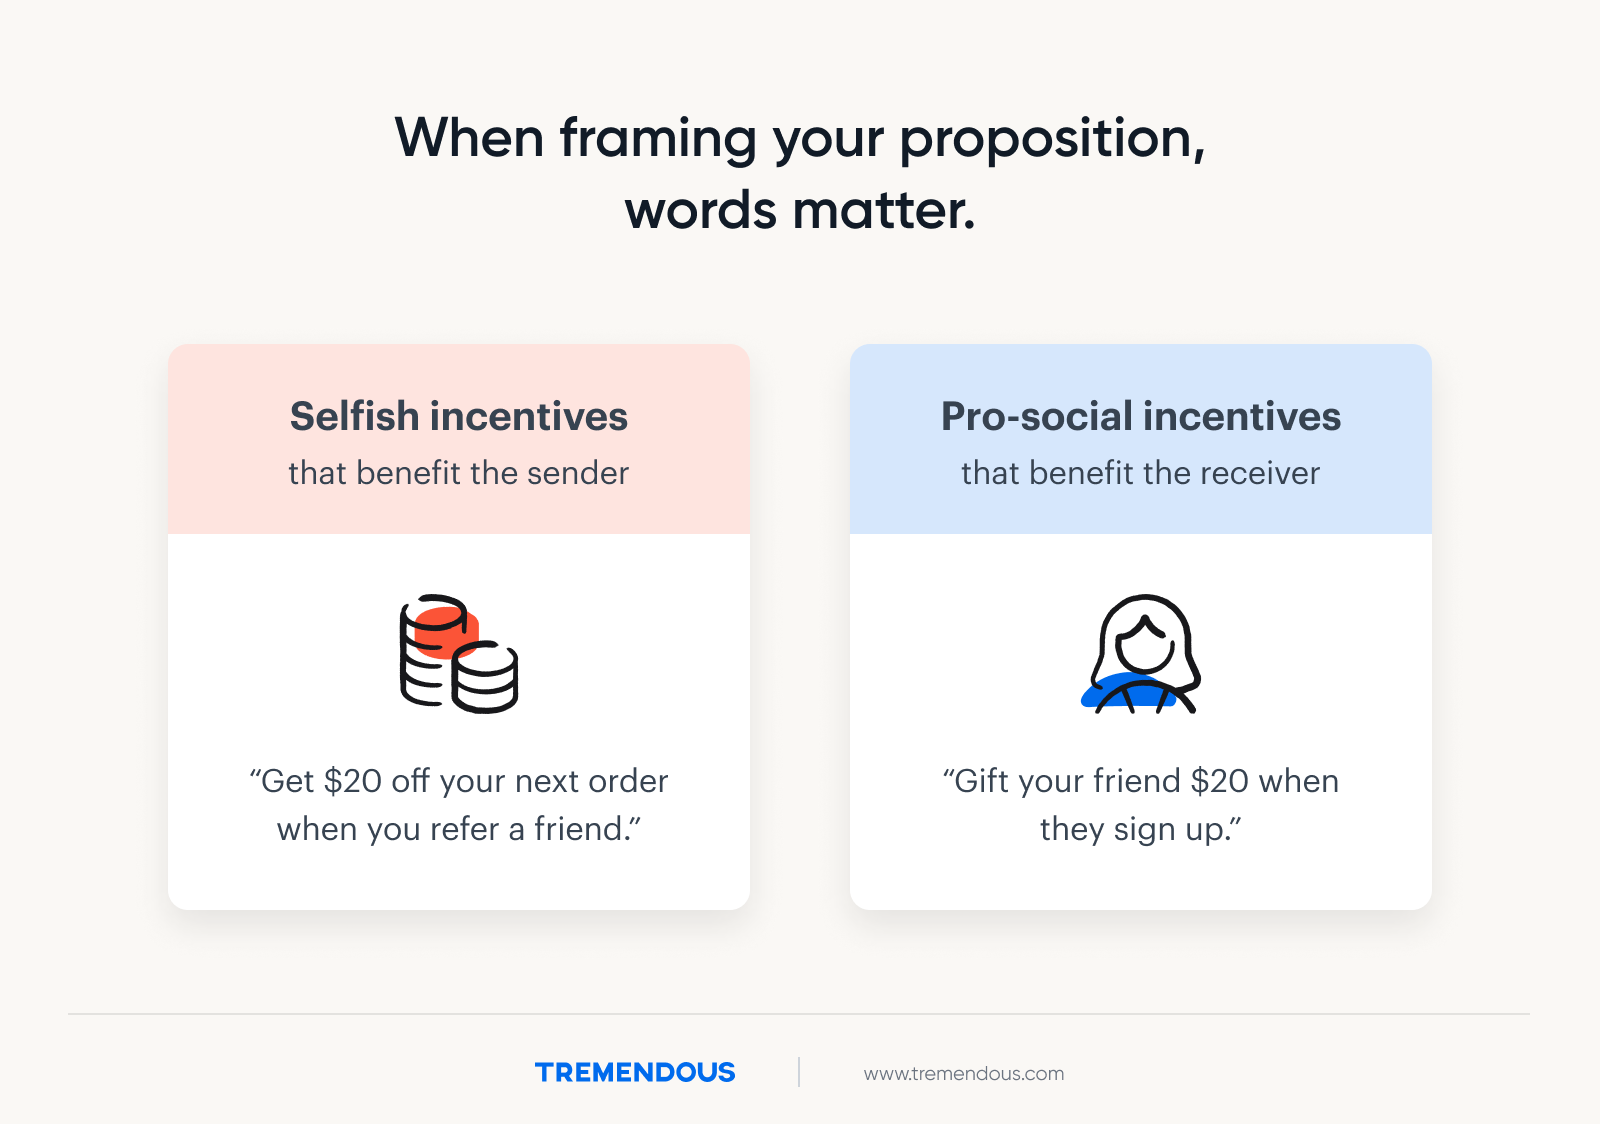 A graphic highlighting the differences between selfish incentives and pro-social incentives.